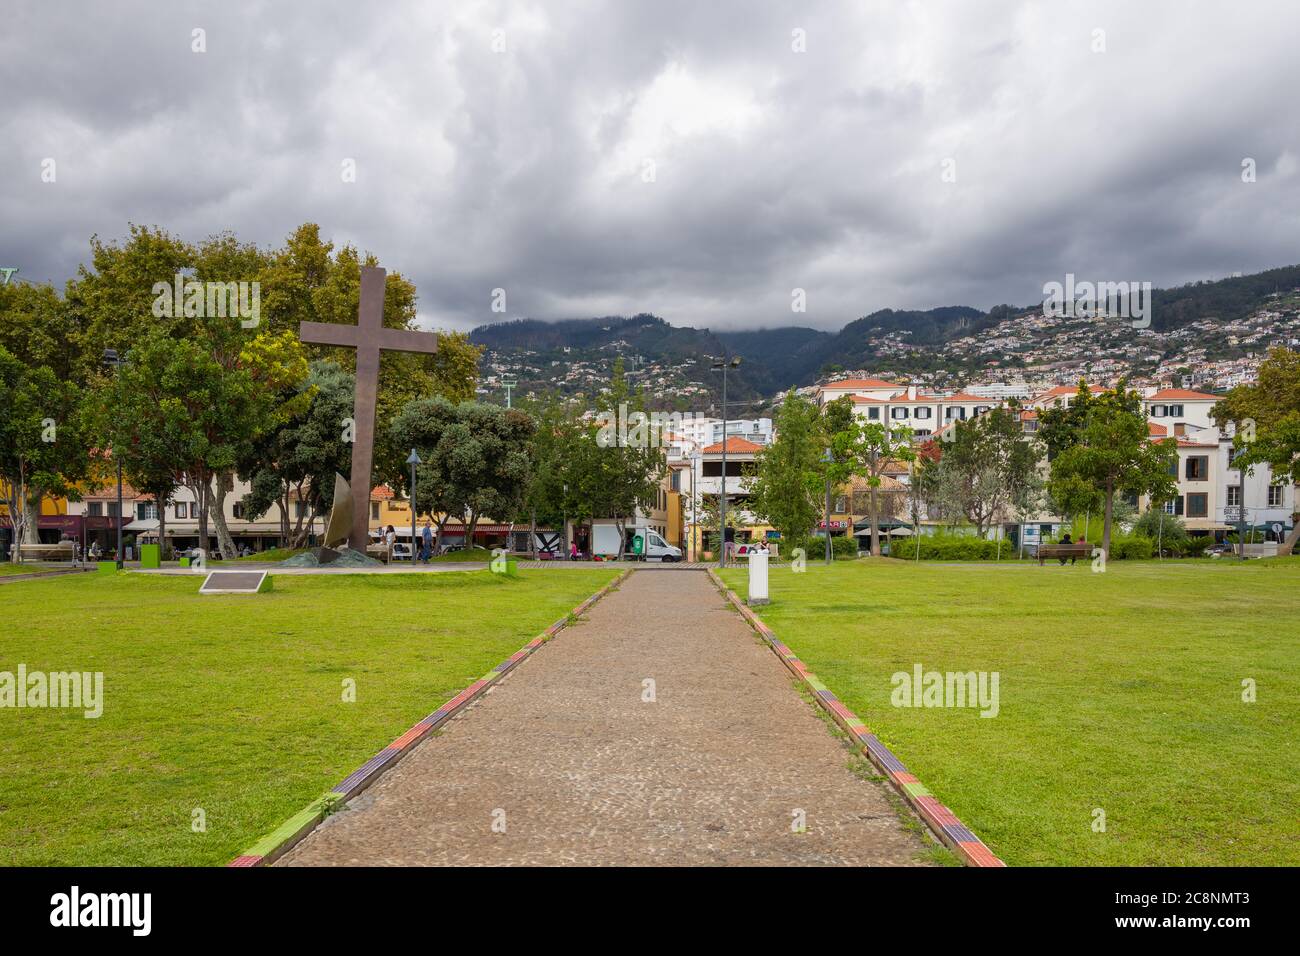 Clouds as a storm is brewing in Funchal, Madeira Stock Photo